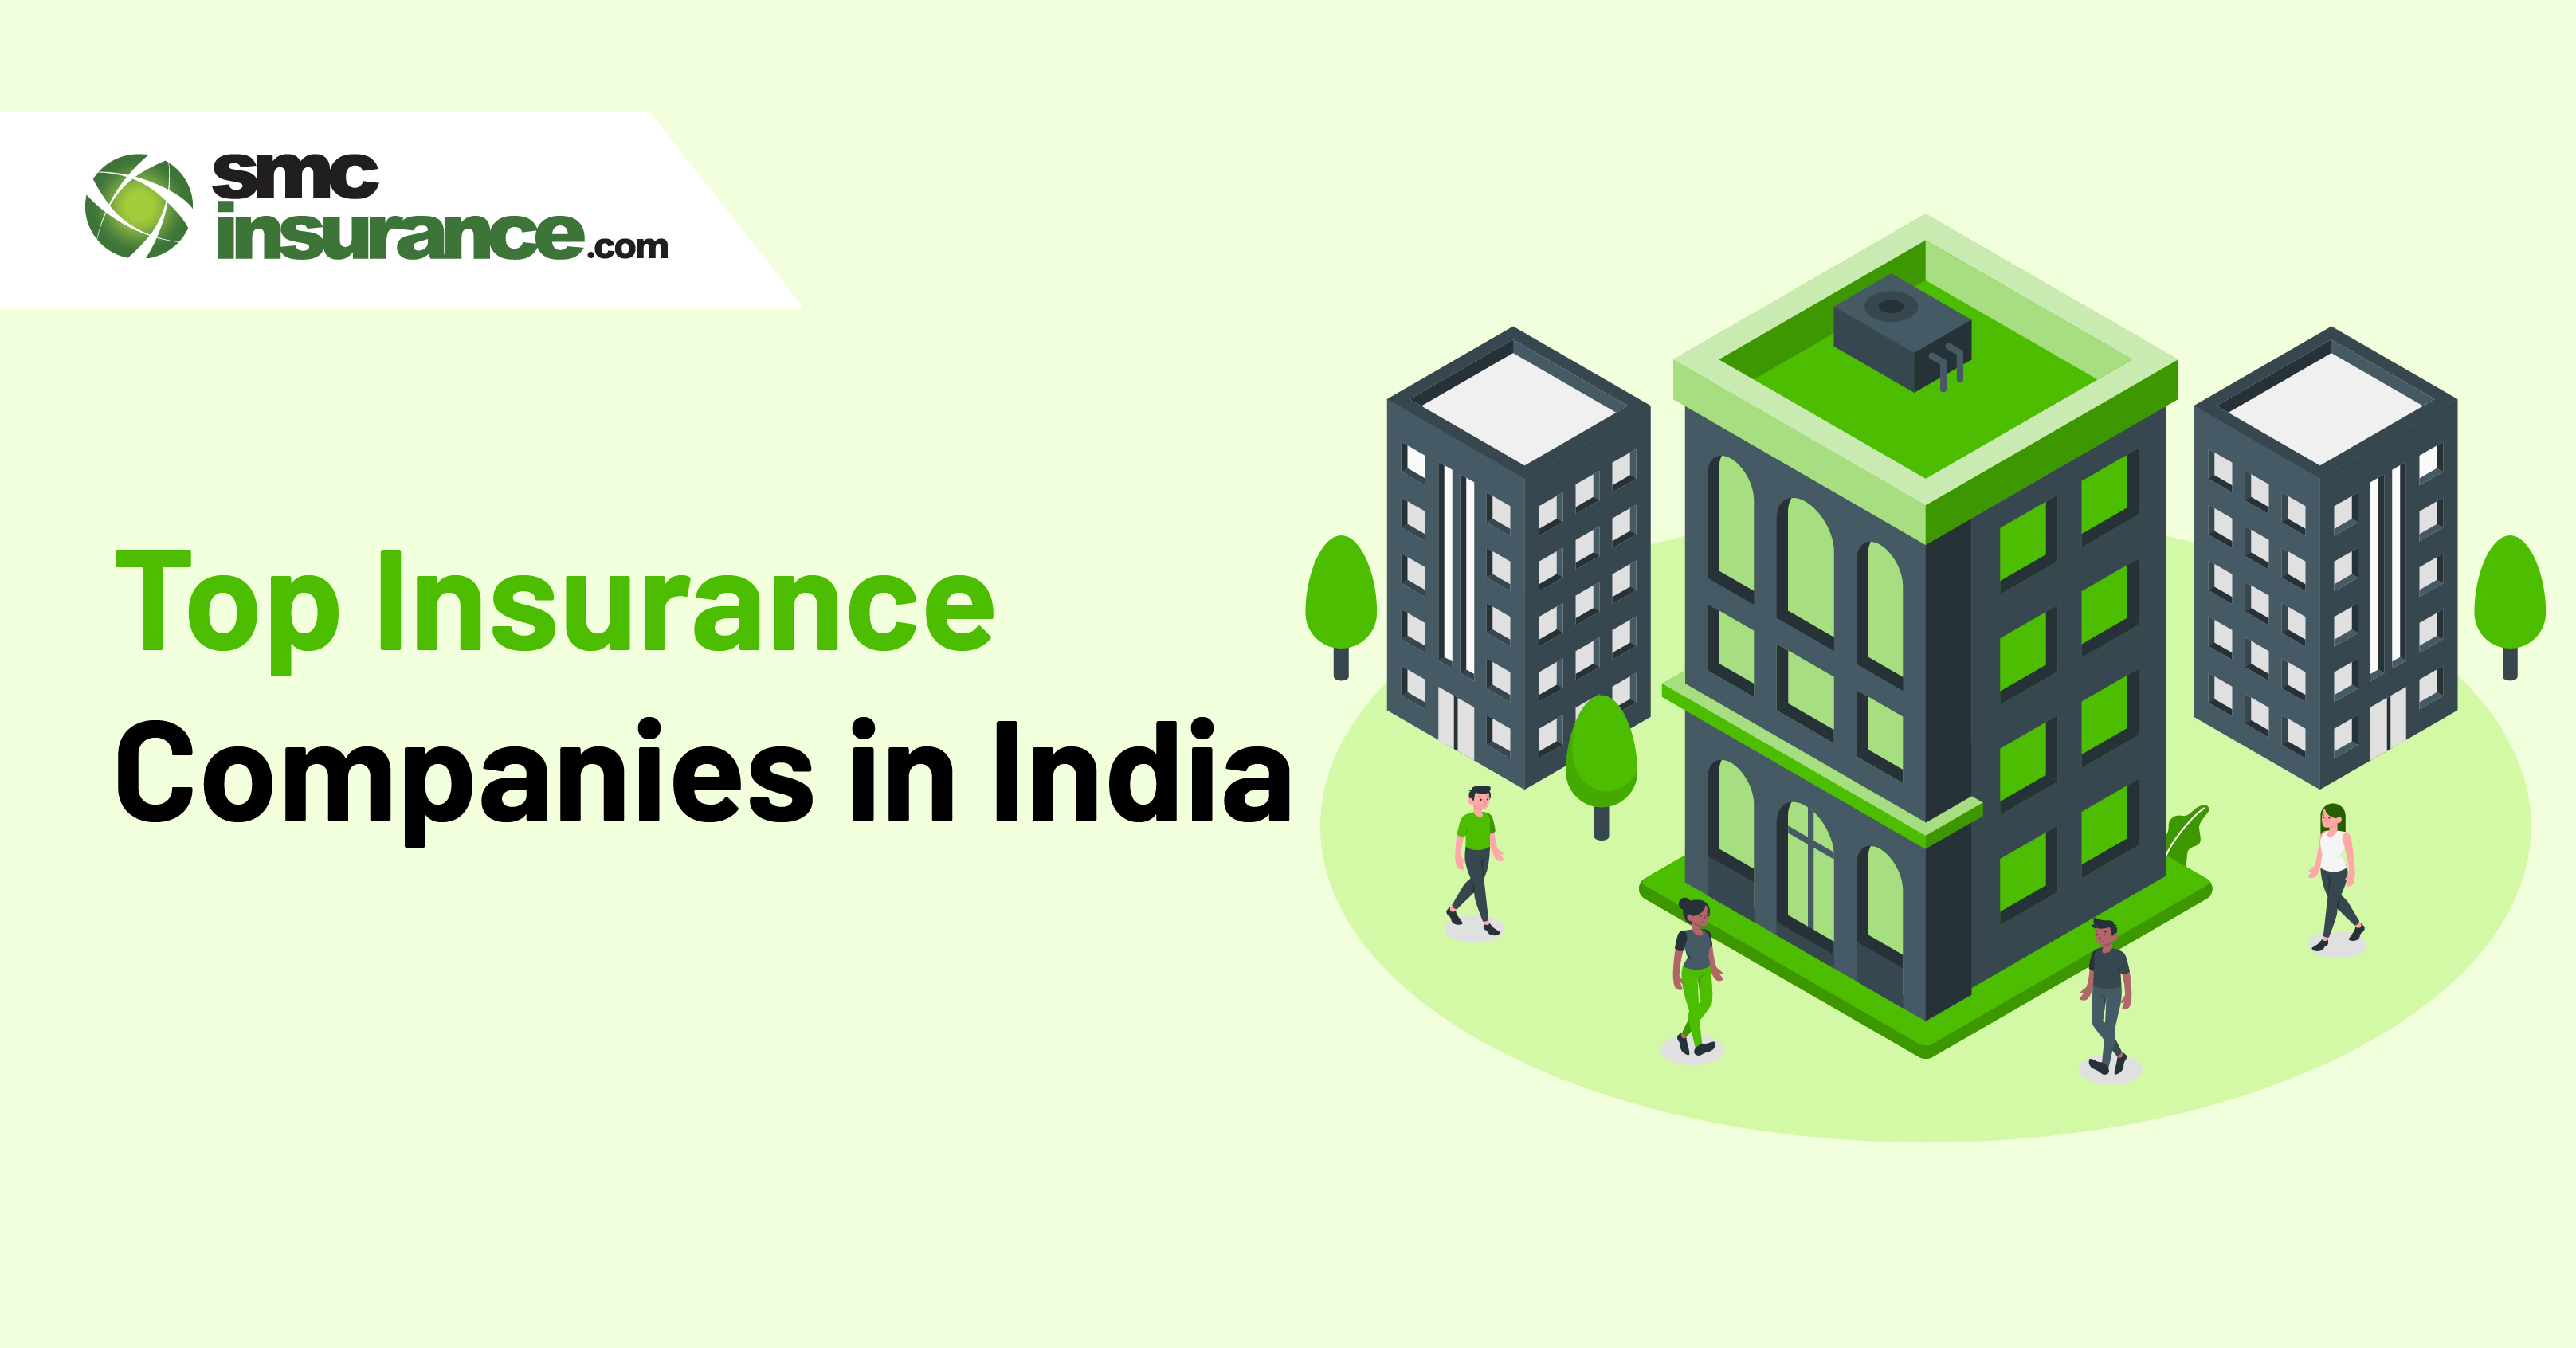 Top Insurance Companies in India